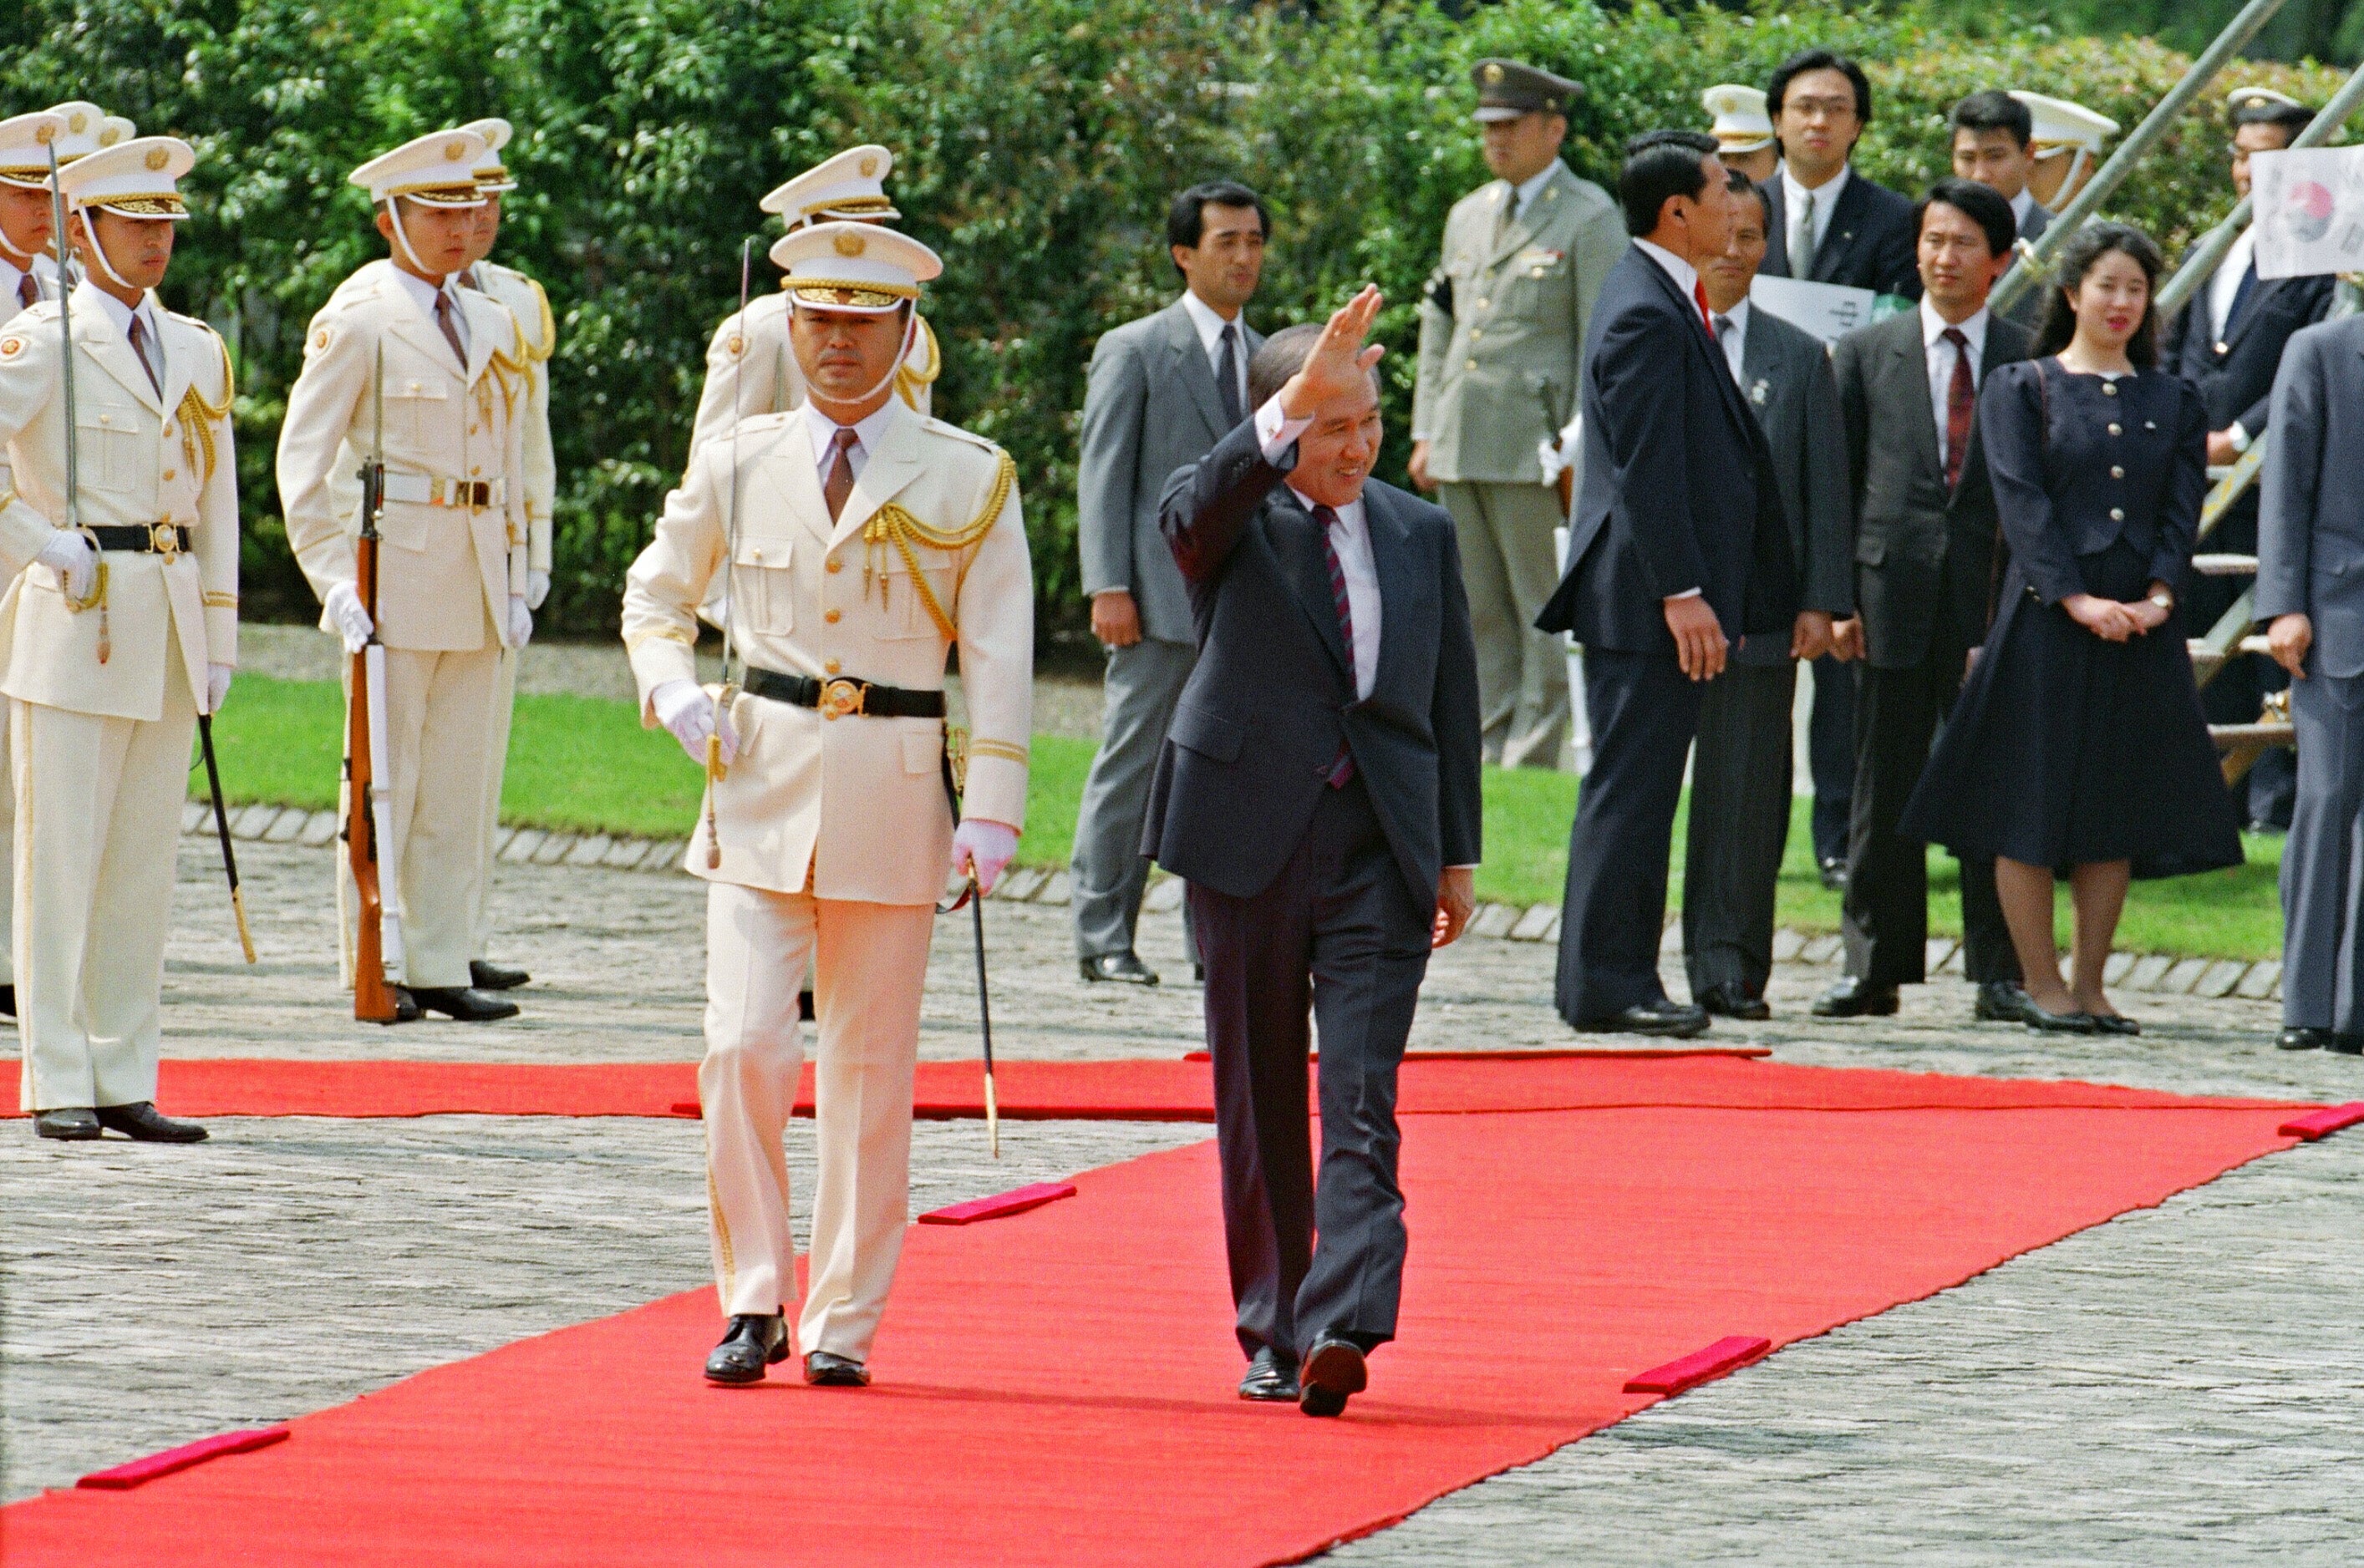 File: South Korean President Roh Tae-Woo waves to Korean wellwishers during a welcoming ceremony at Akasaka Guest House in Tokyo, 24 May 1990